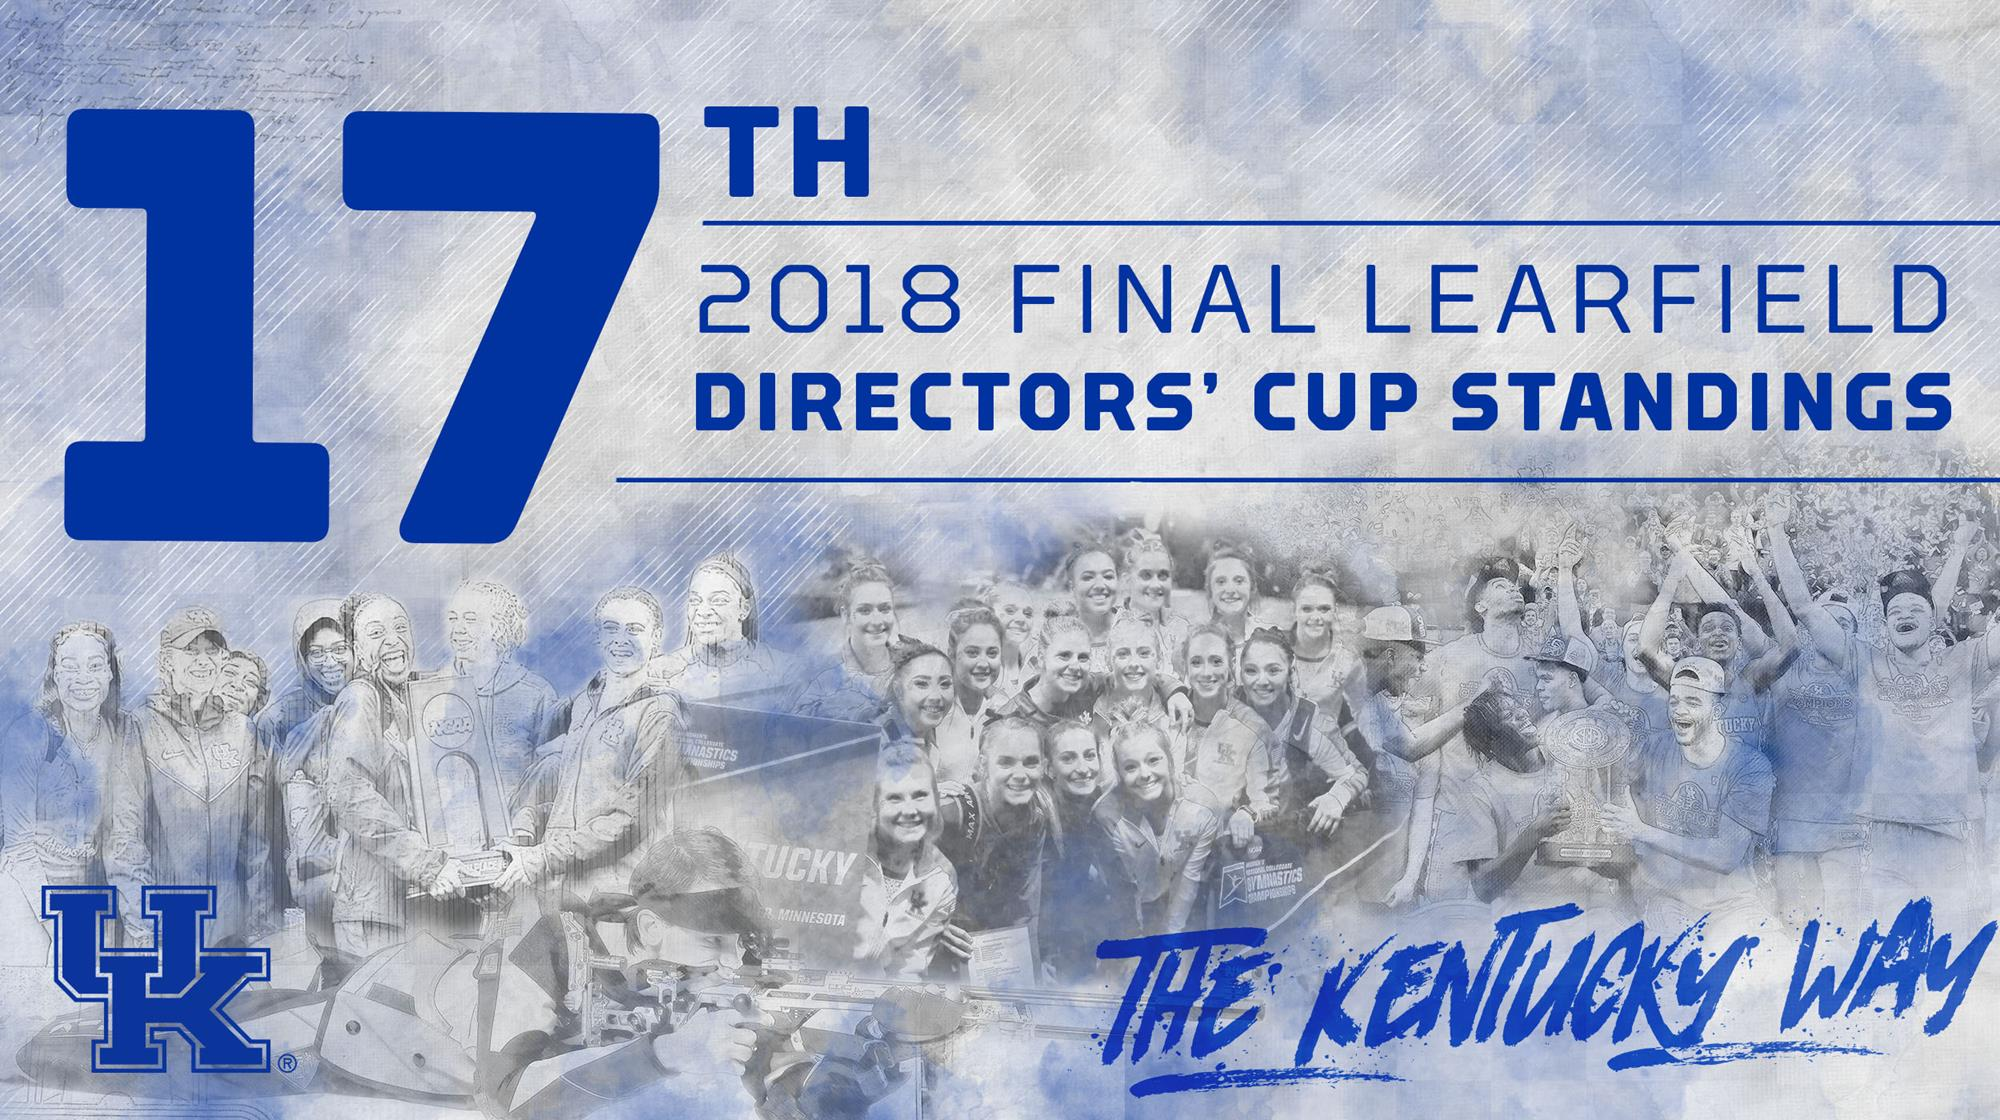 UK Finishes 17th in 2018 Directors’ Cup Standings